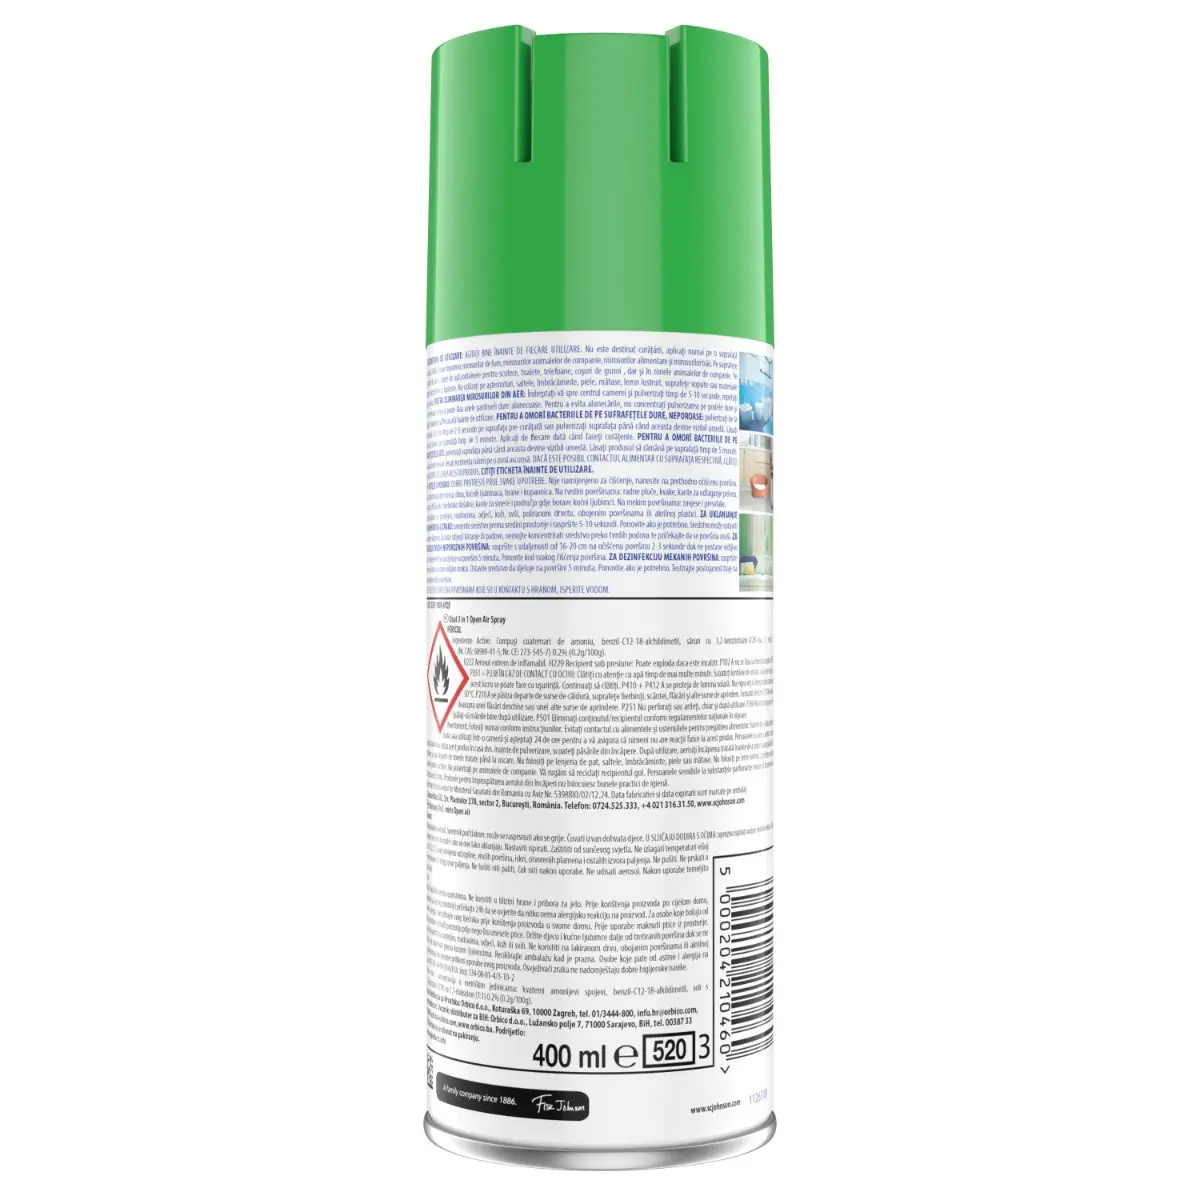 Oust 3in1 Aerosol Outdoor Scent 400ml